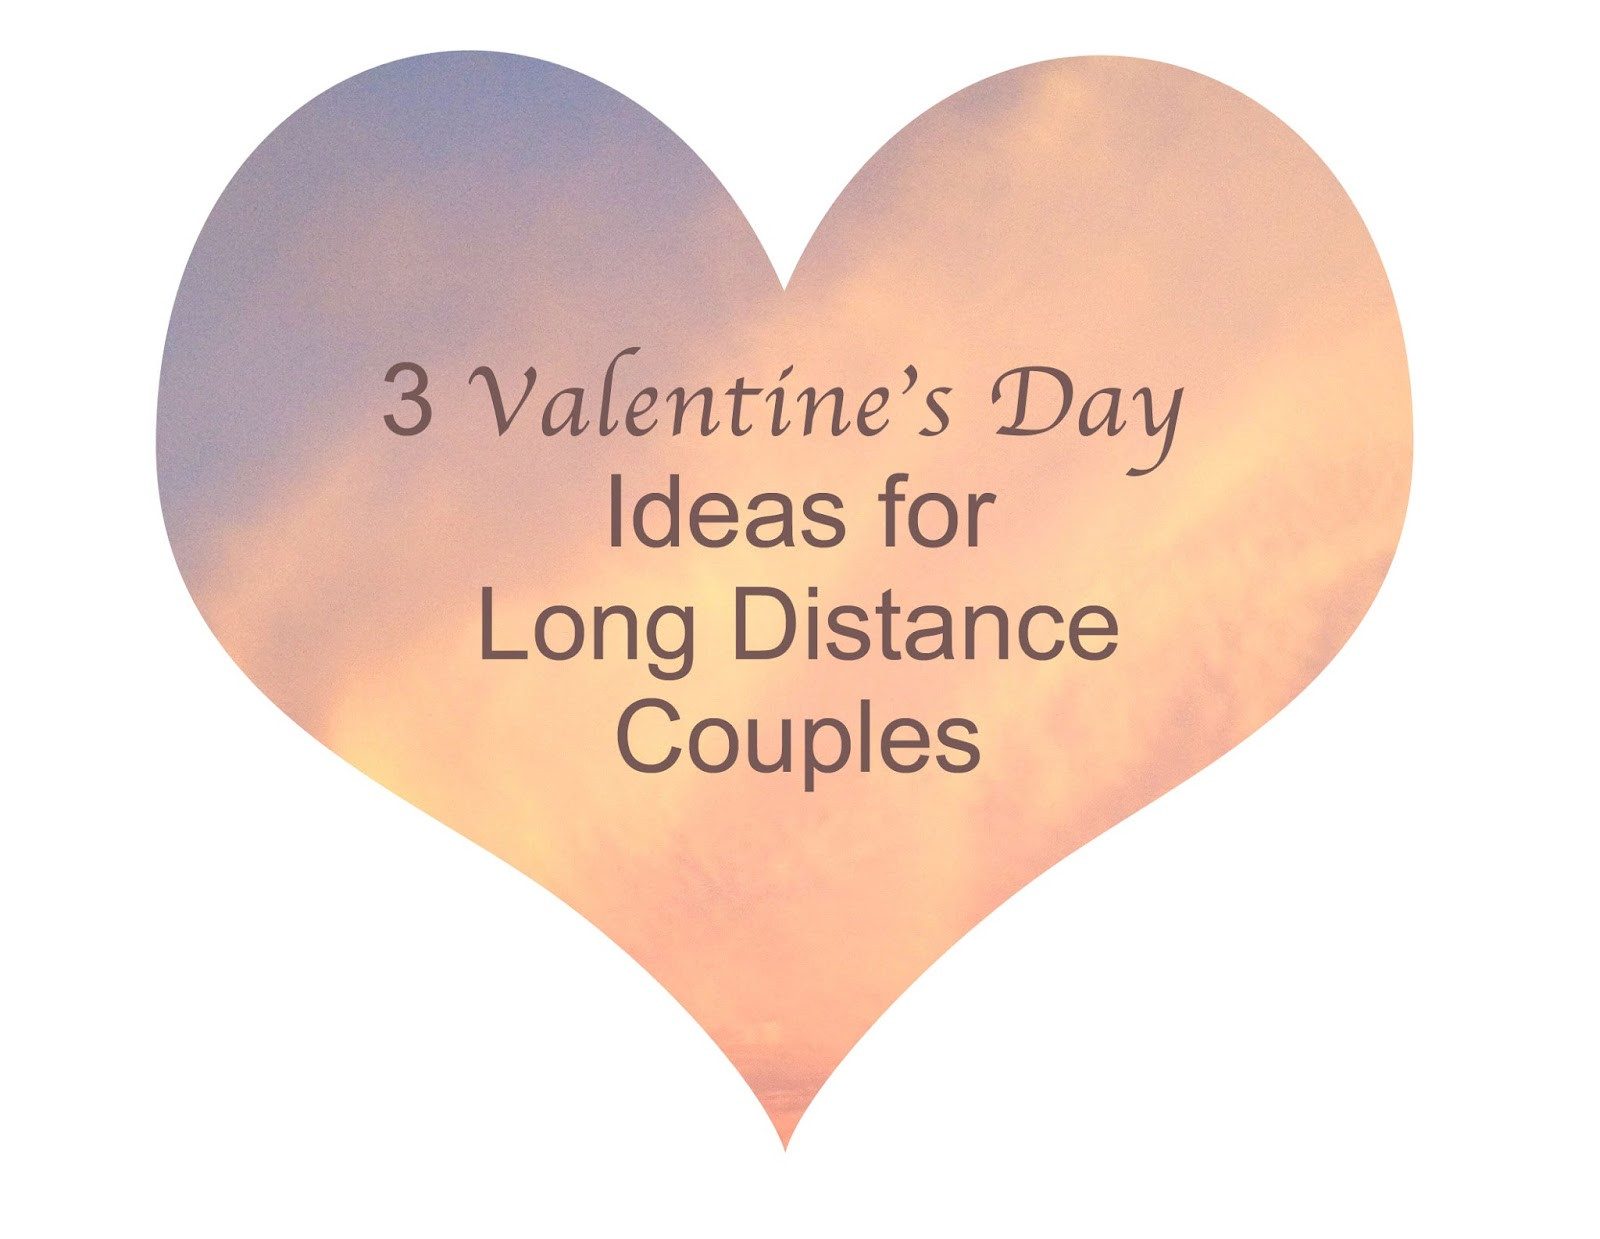 Valentines Day Long Distance Ideas Lovely Meet Me In Midtown 3 Valentine S Day Ideas for Long